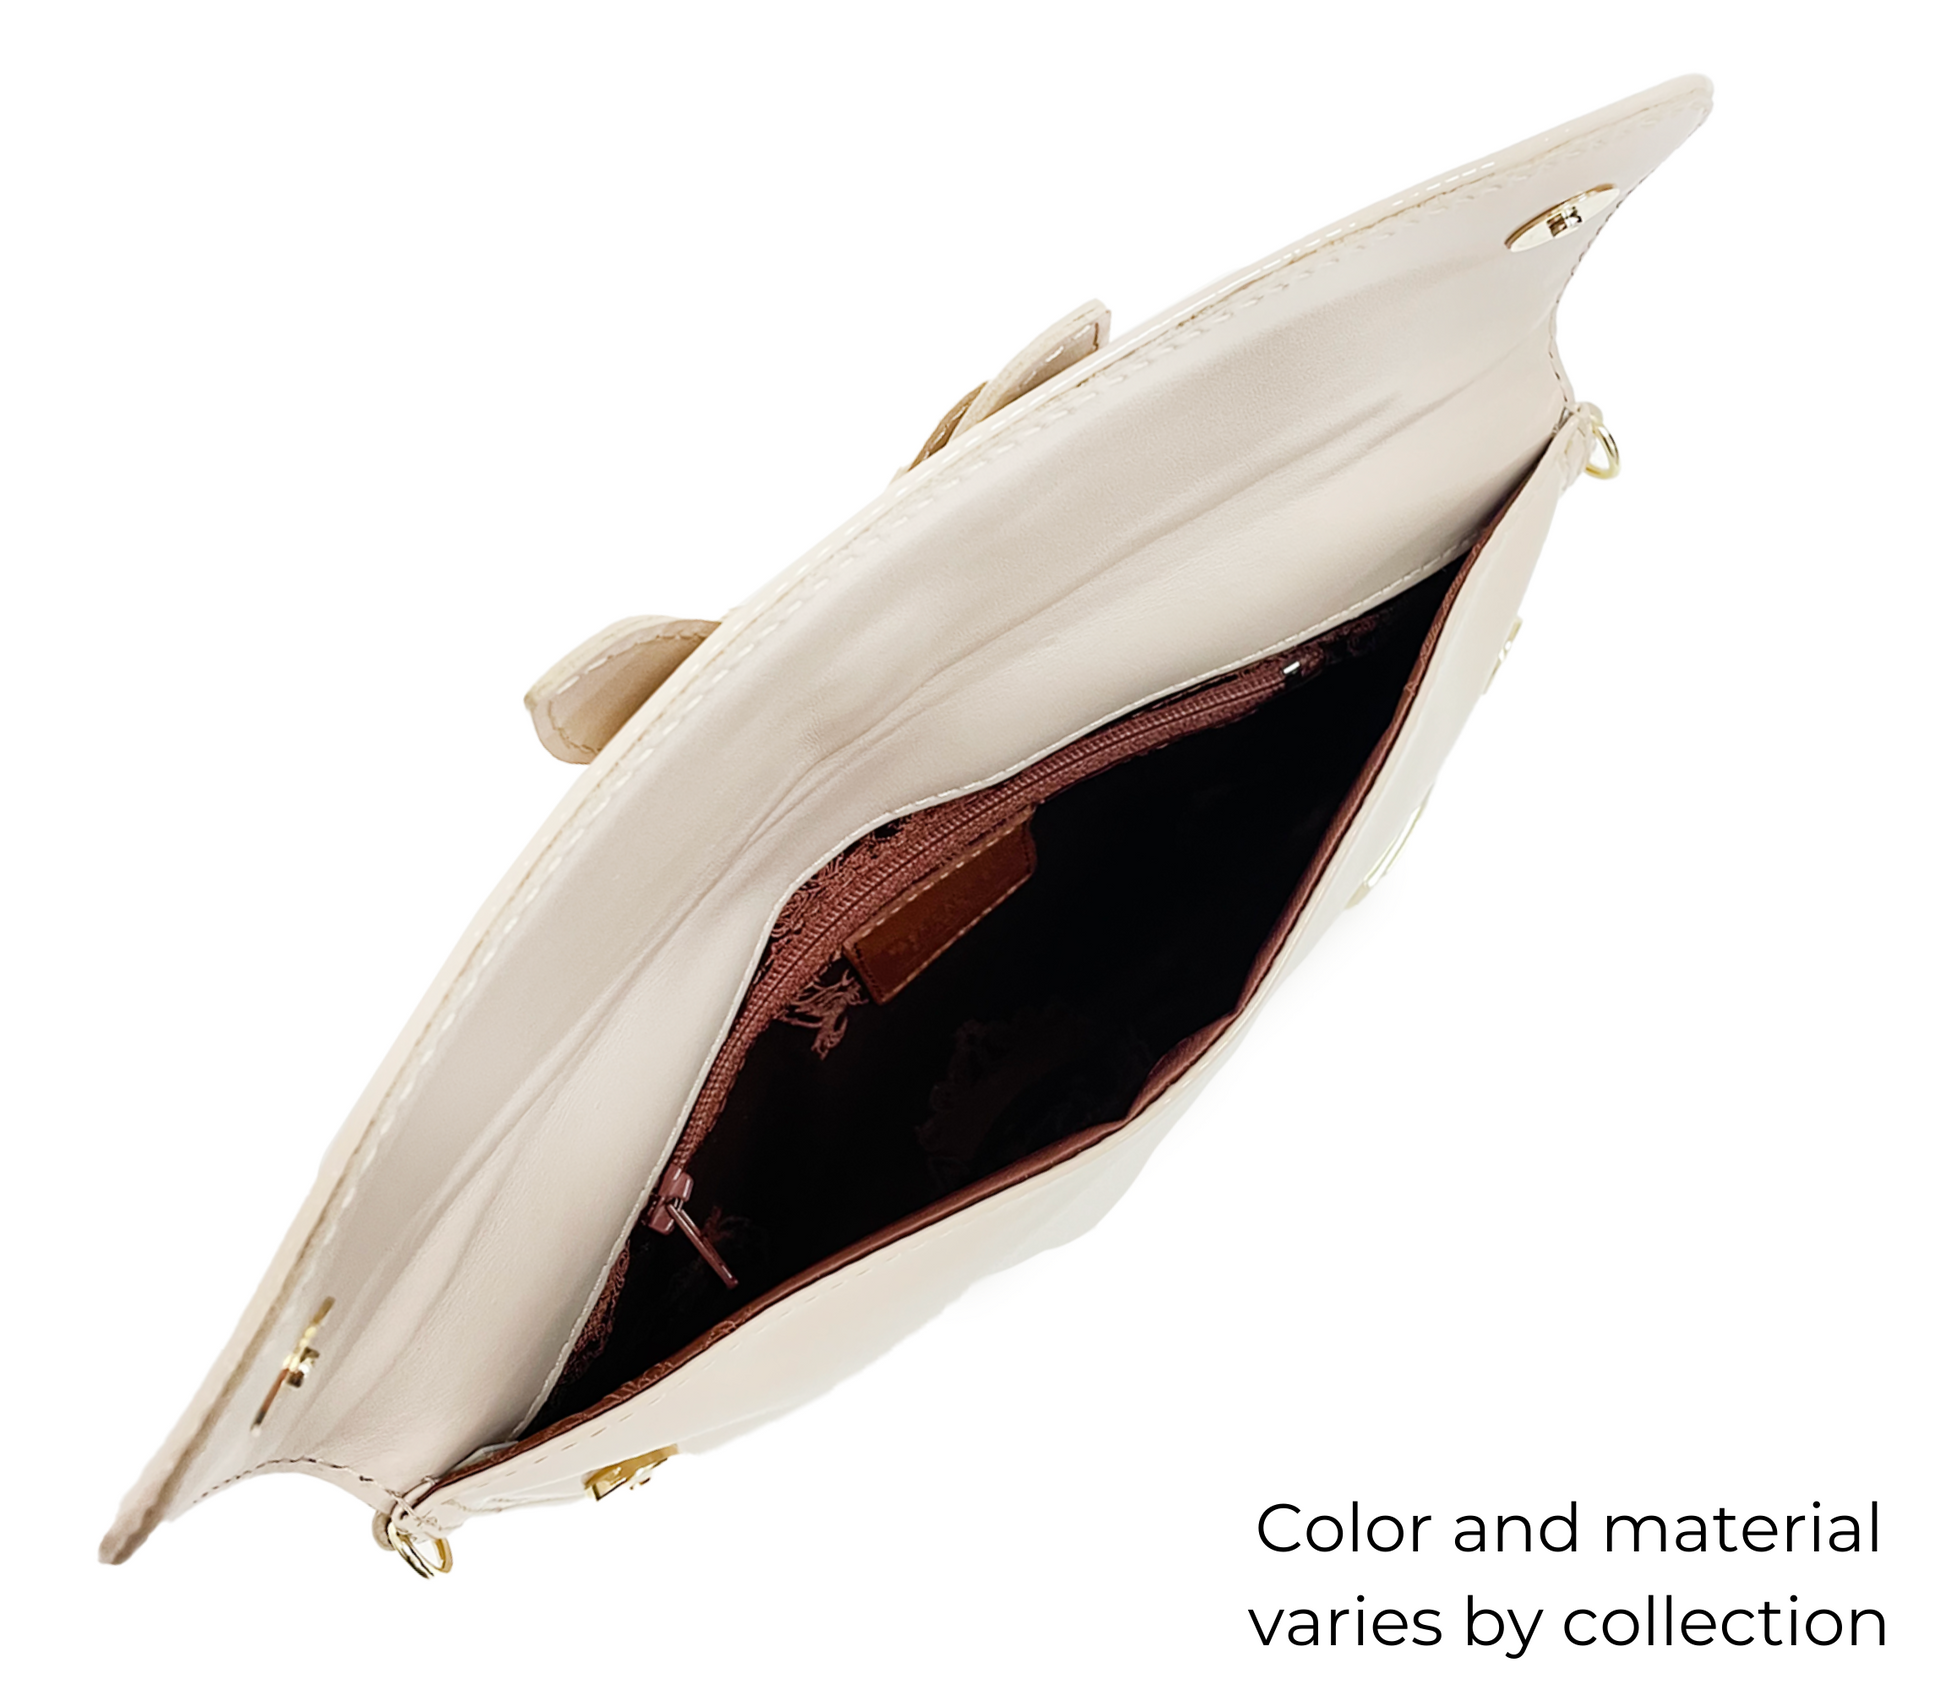 #color_ Beige | Cavalinho All In Patent Leather Clutch Bag - Beige - inside_0068_a13c19b2-2eb8-481a-a4fc-4b5c6f07b787